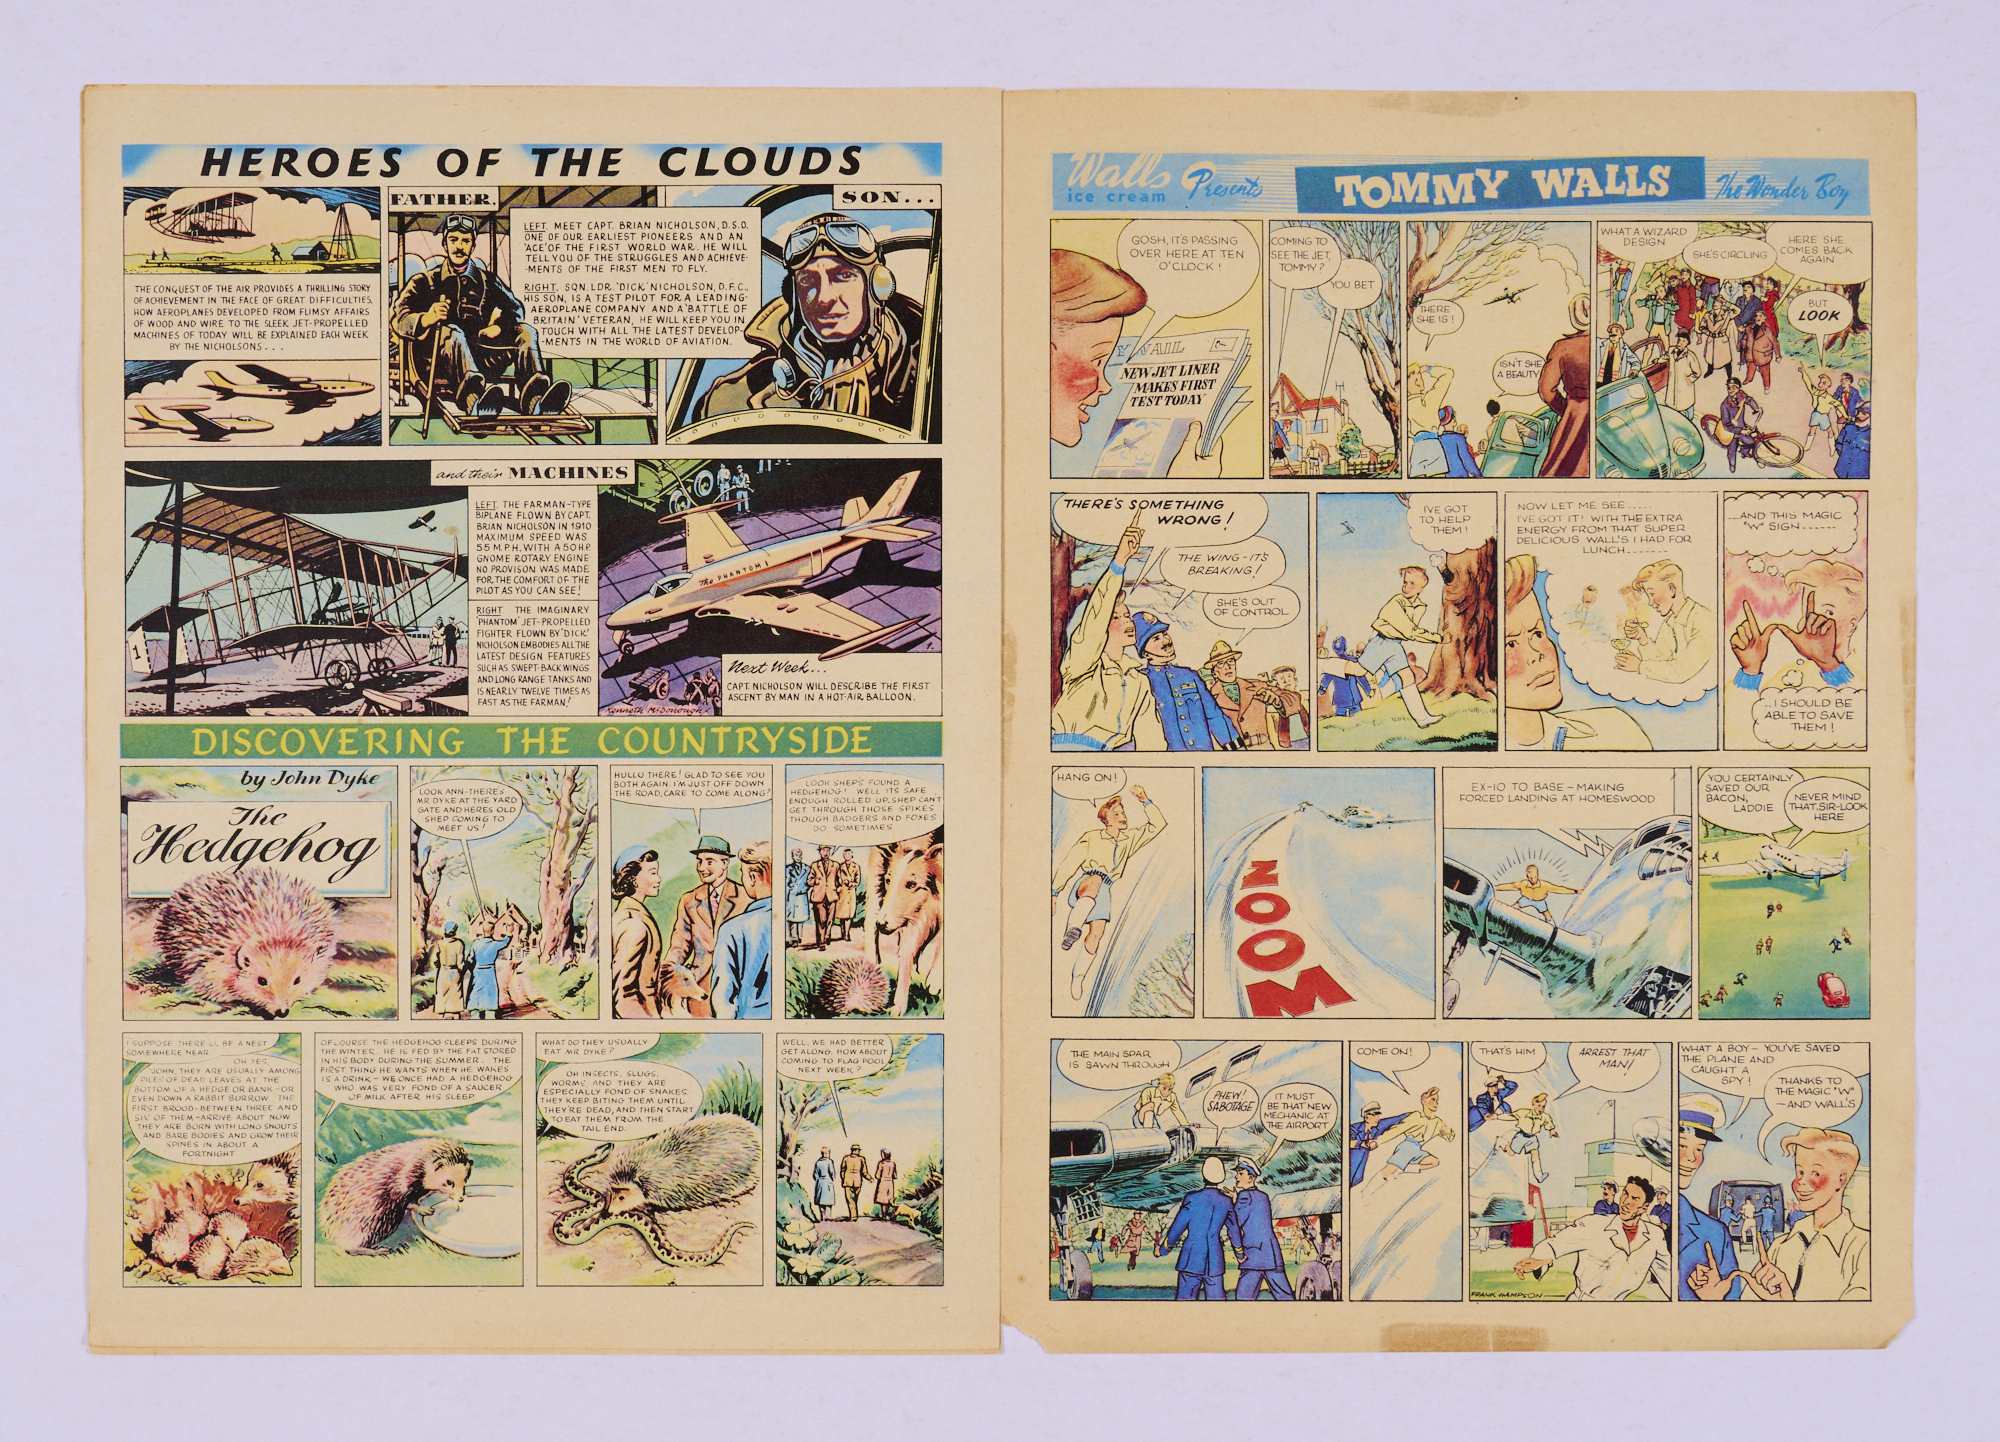 Eagle No 1 promotional eight-page full colour issue distributed to churches and schools in the UK in 1950 to publicise the imminent print run of the first issue of The Eagle. The front cover has no 'Dan Dare Pilot of the Future' header and a different date of 21st April 1950. Bright fresh colours. The back corner has two small lower corner edge pieces missing and some discoloured tape marks. Only a handful of copies are known to exist